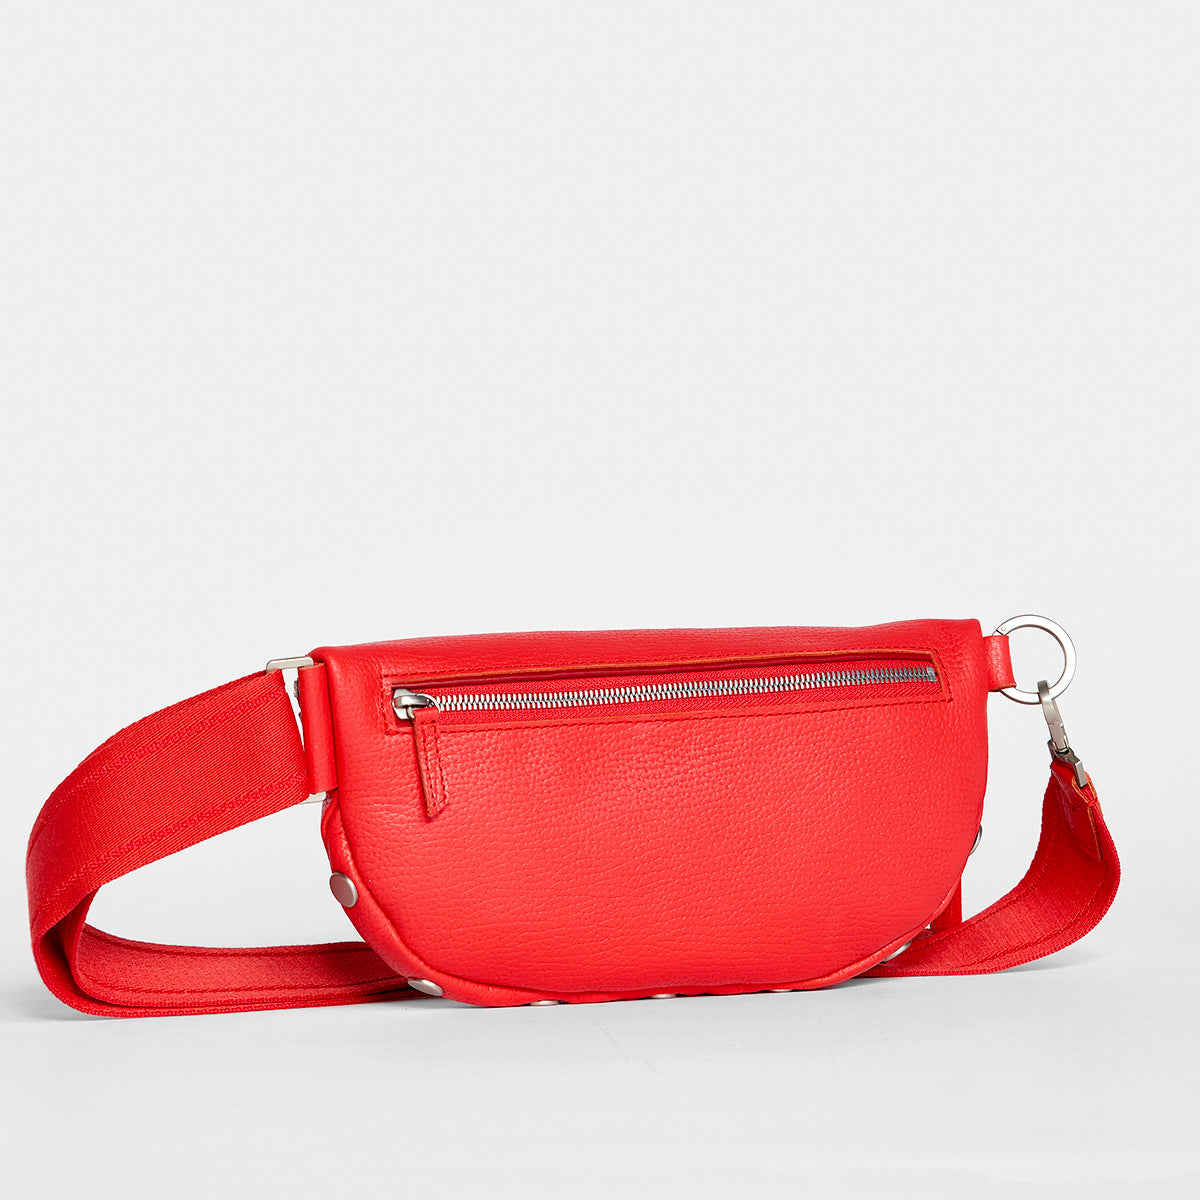 Charles-Crossbody-Med-Lighthouse-Red-Back-View